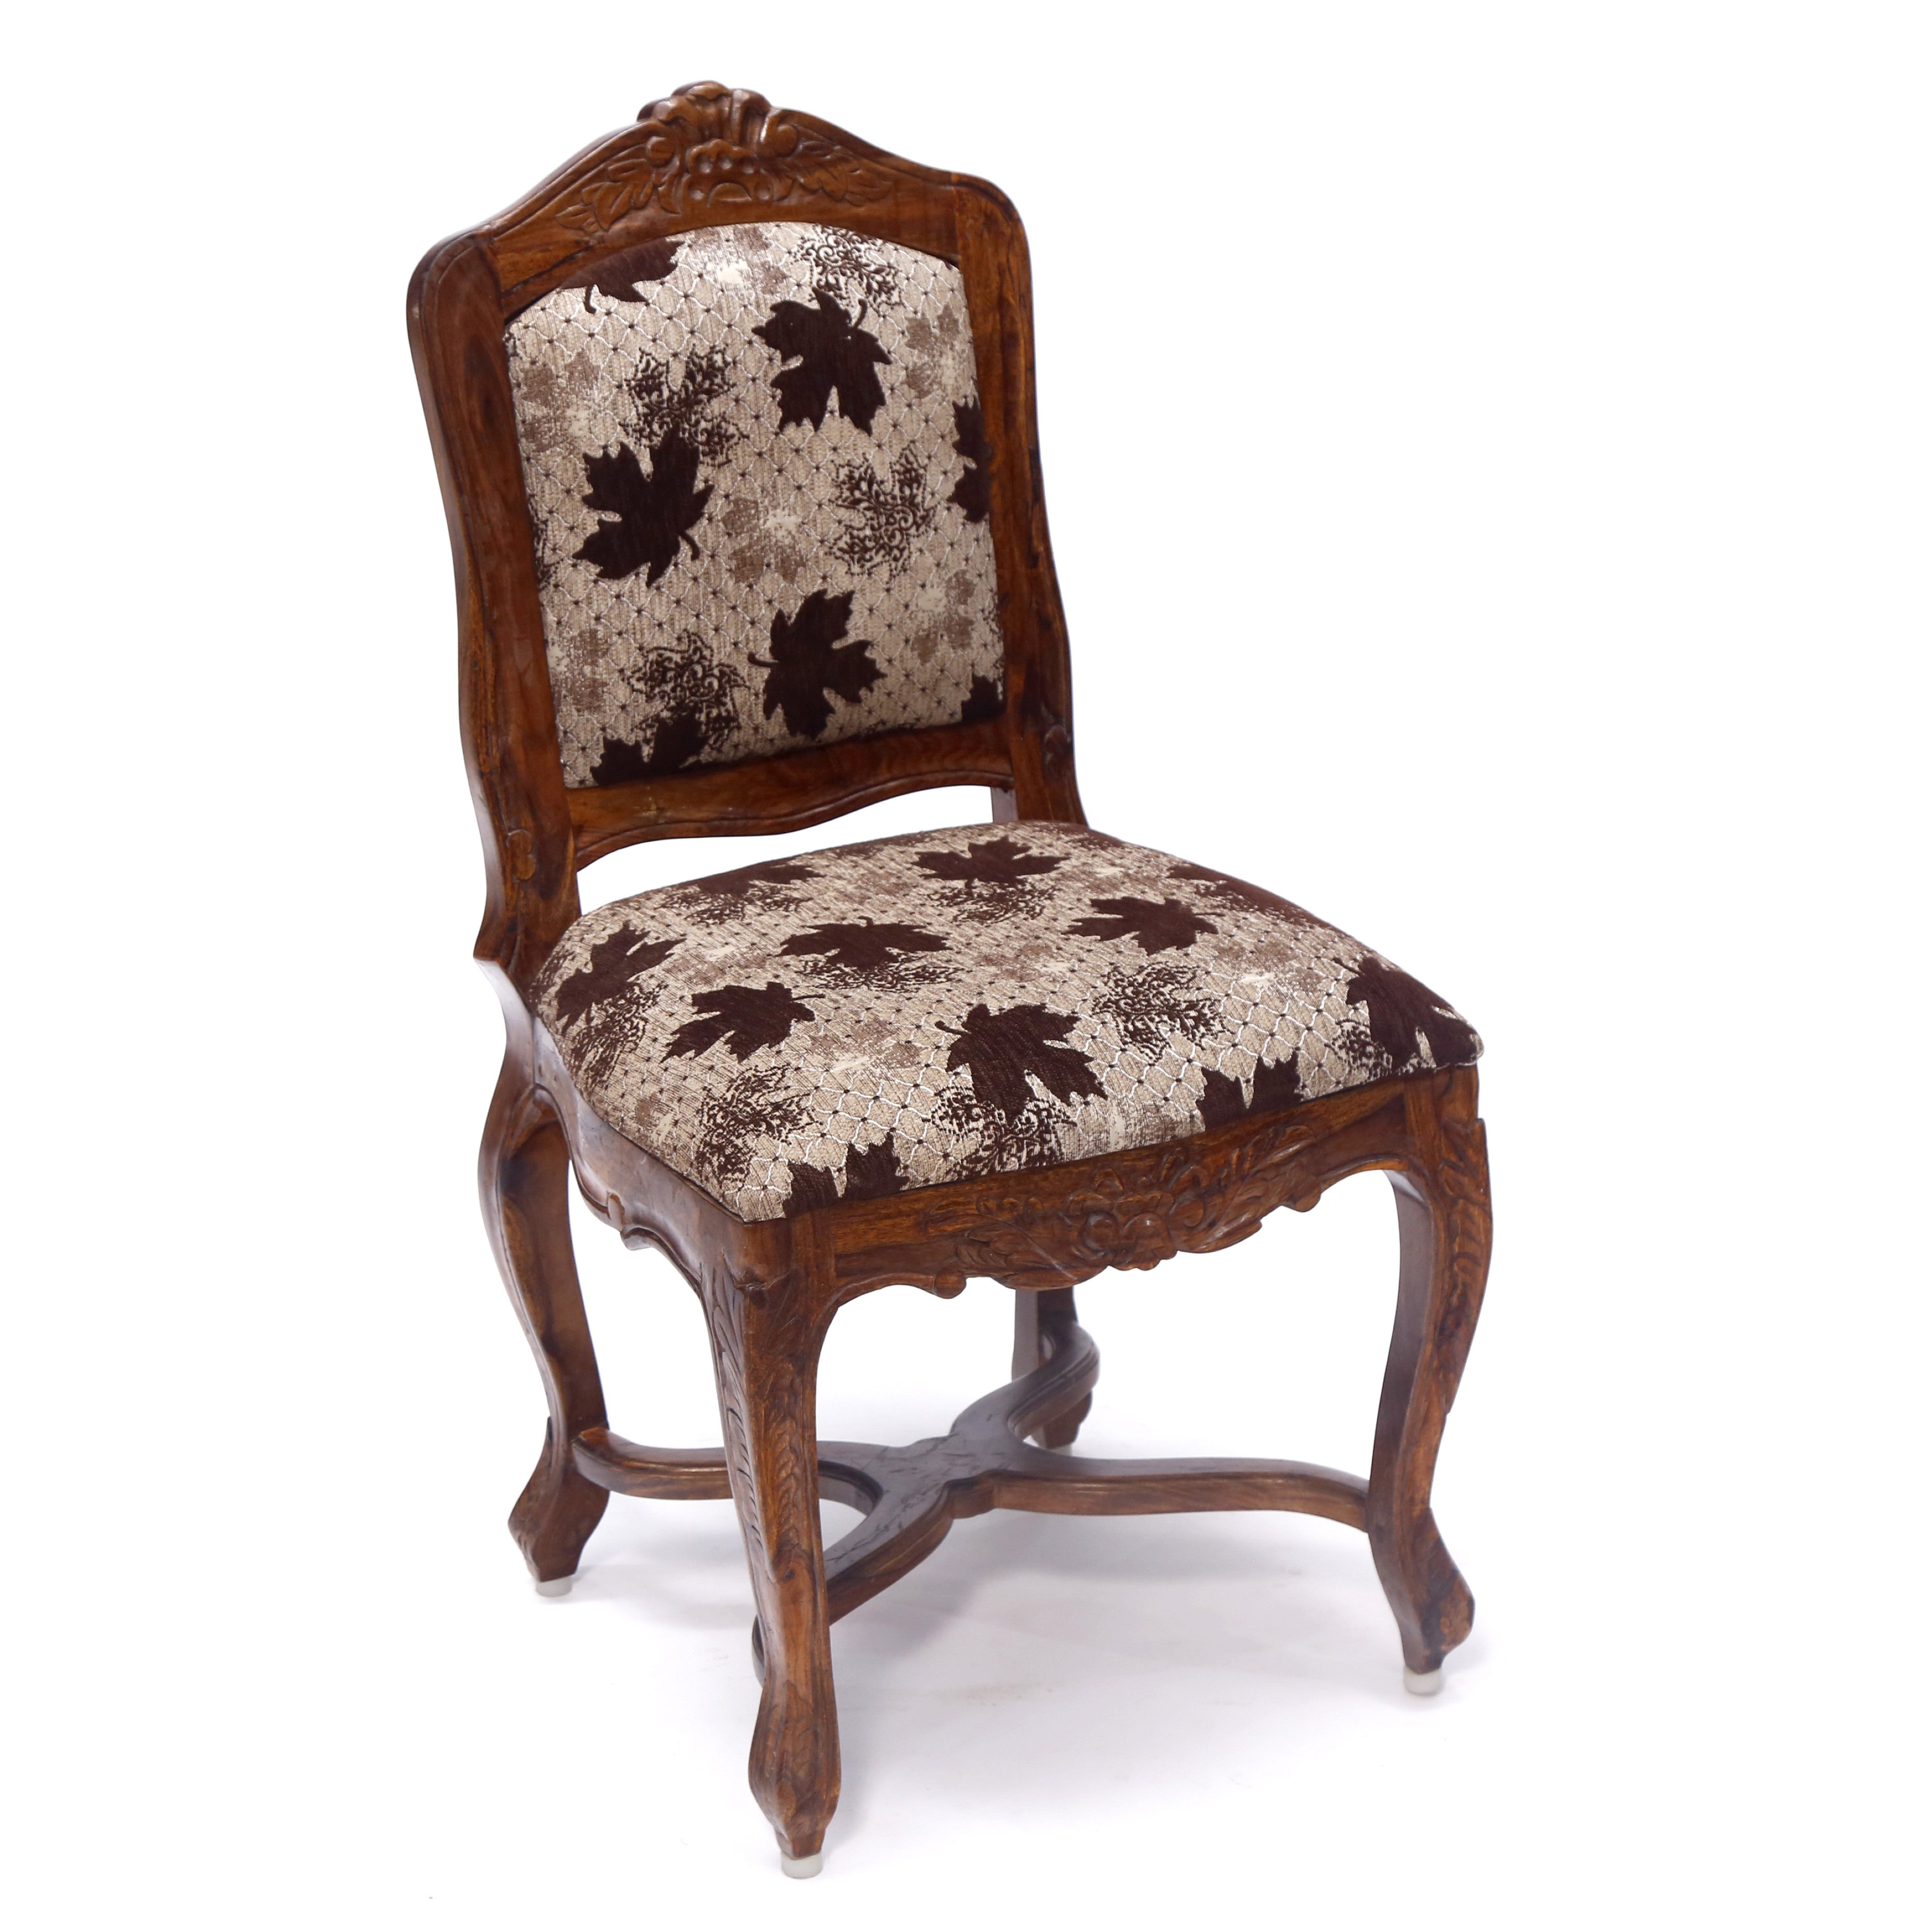 (Set of 2) Natural Tone Royal Chair Dining Chair